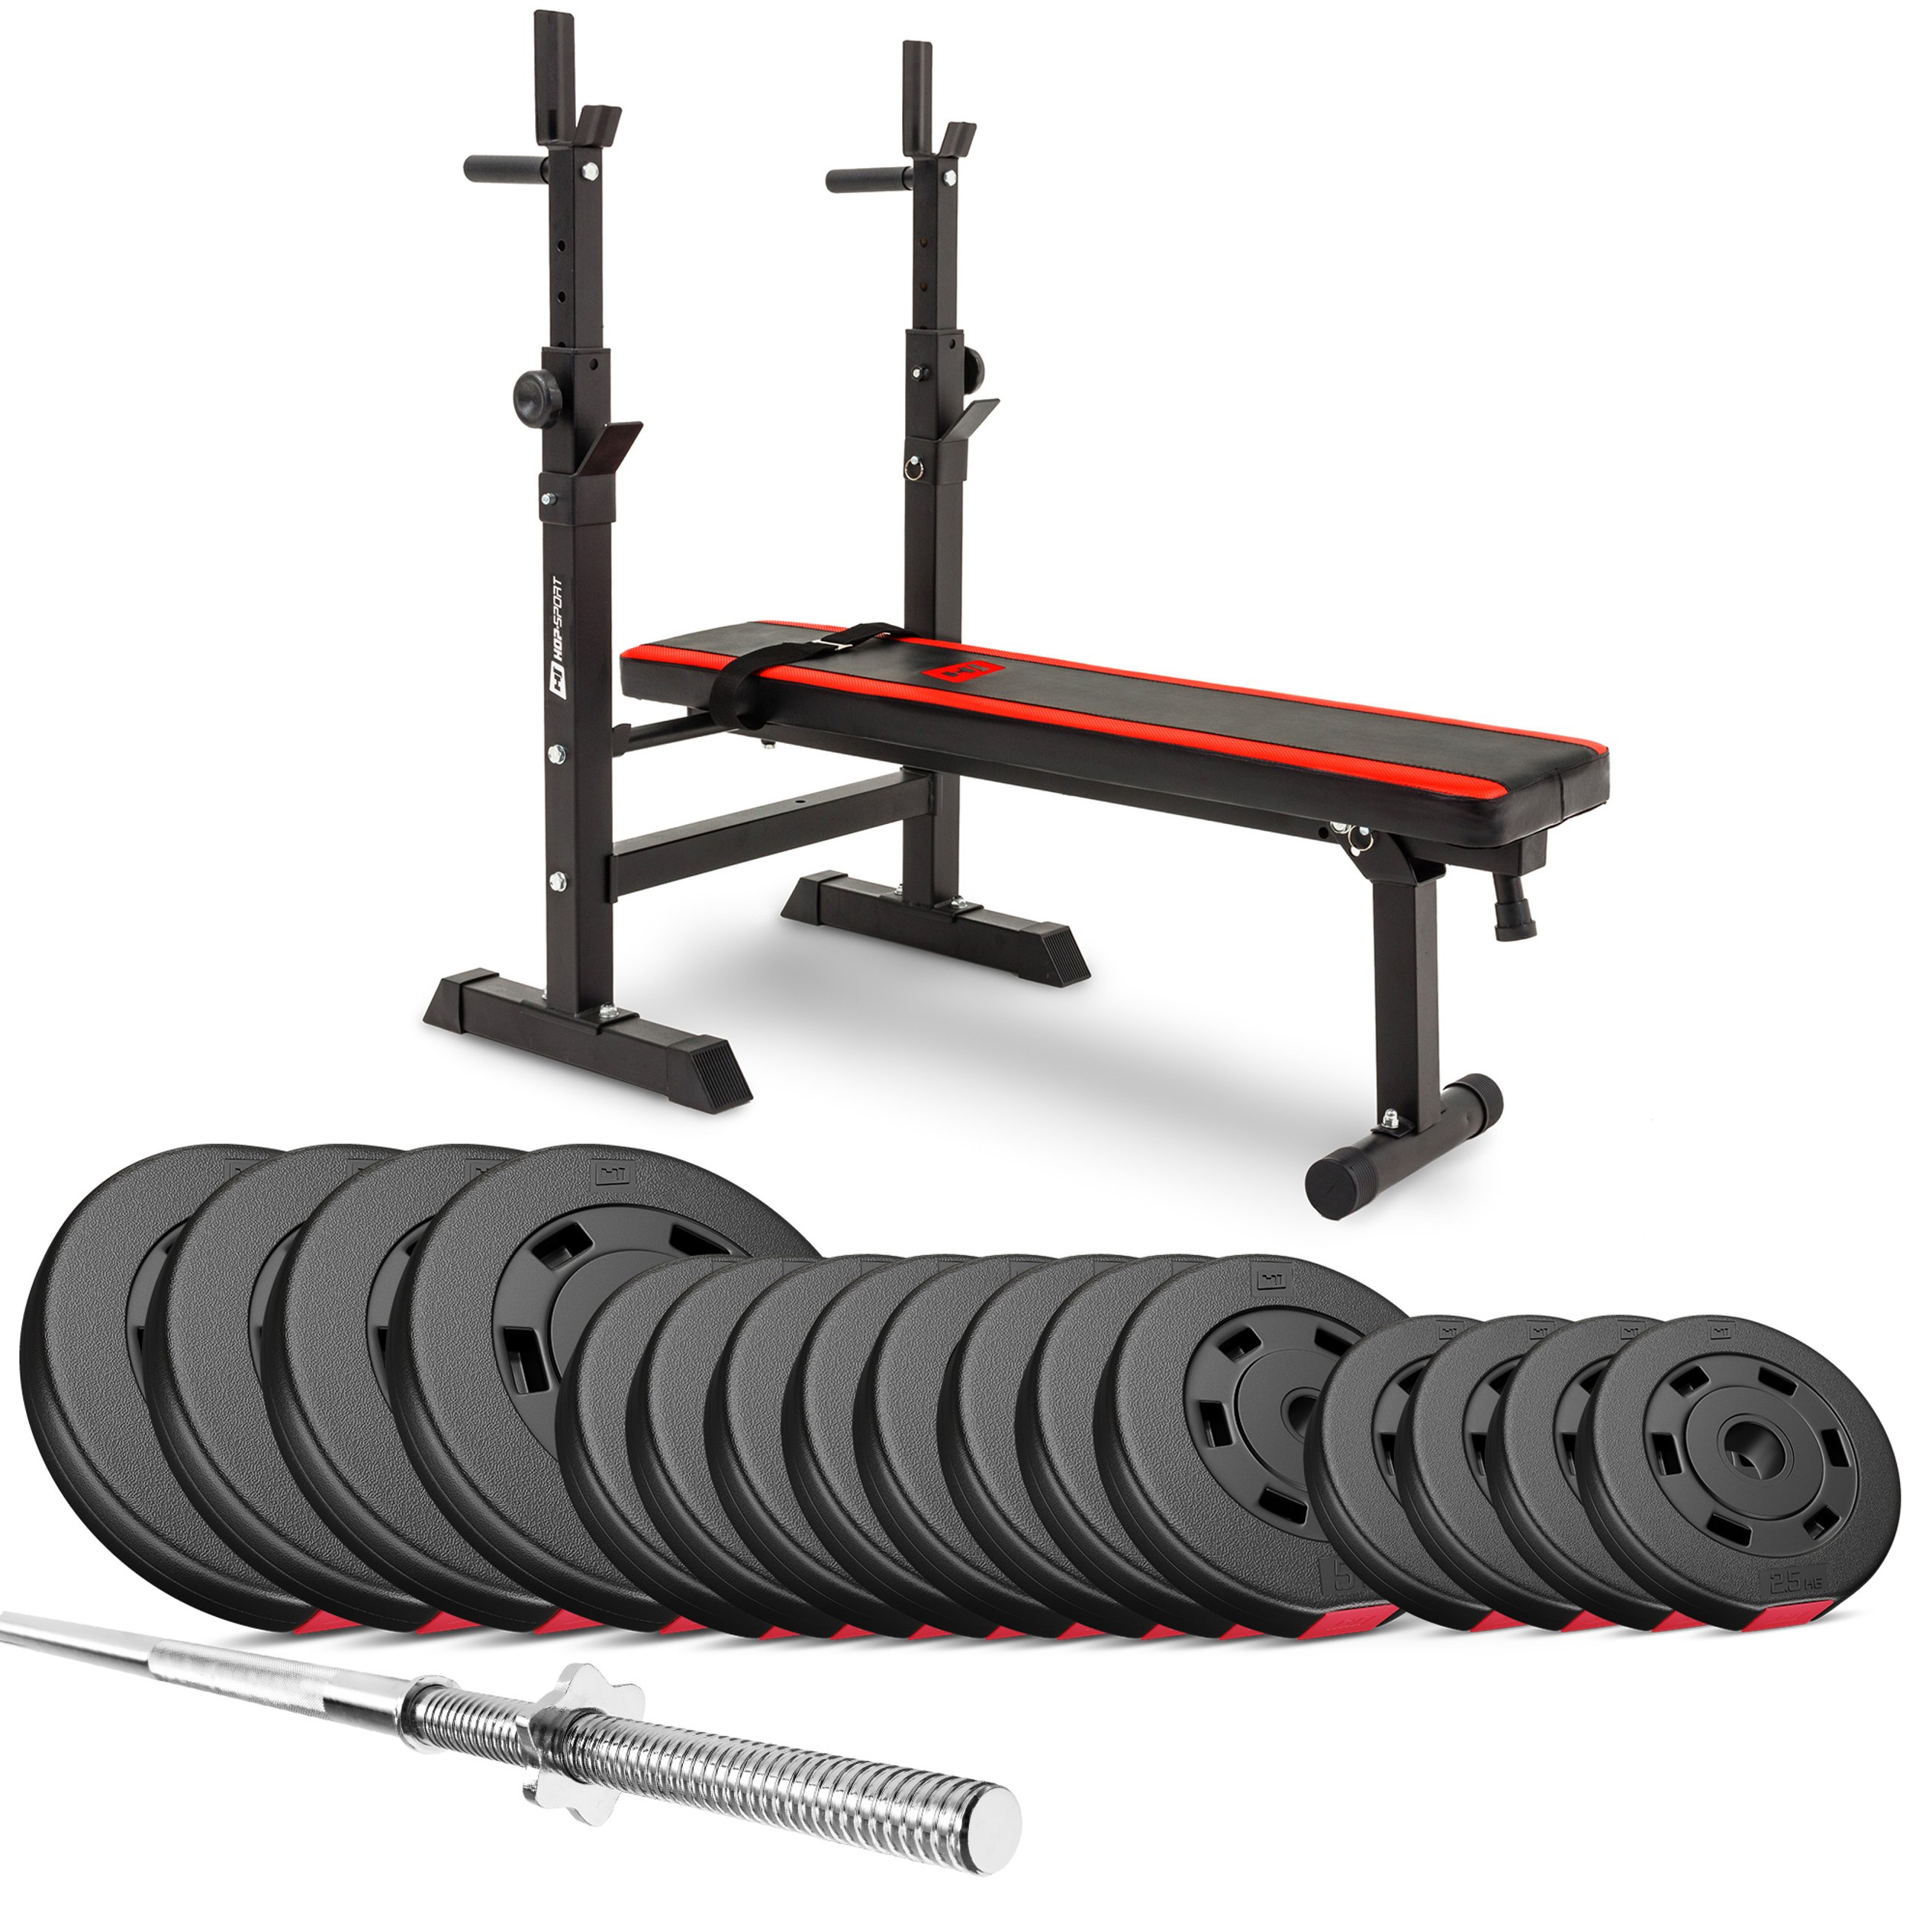 Premium 99 kg Barbell Set with HS-1080 Weight Bench